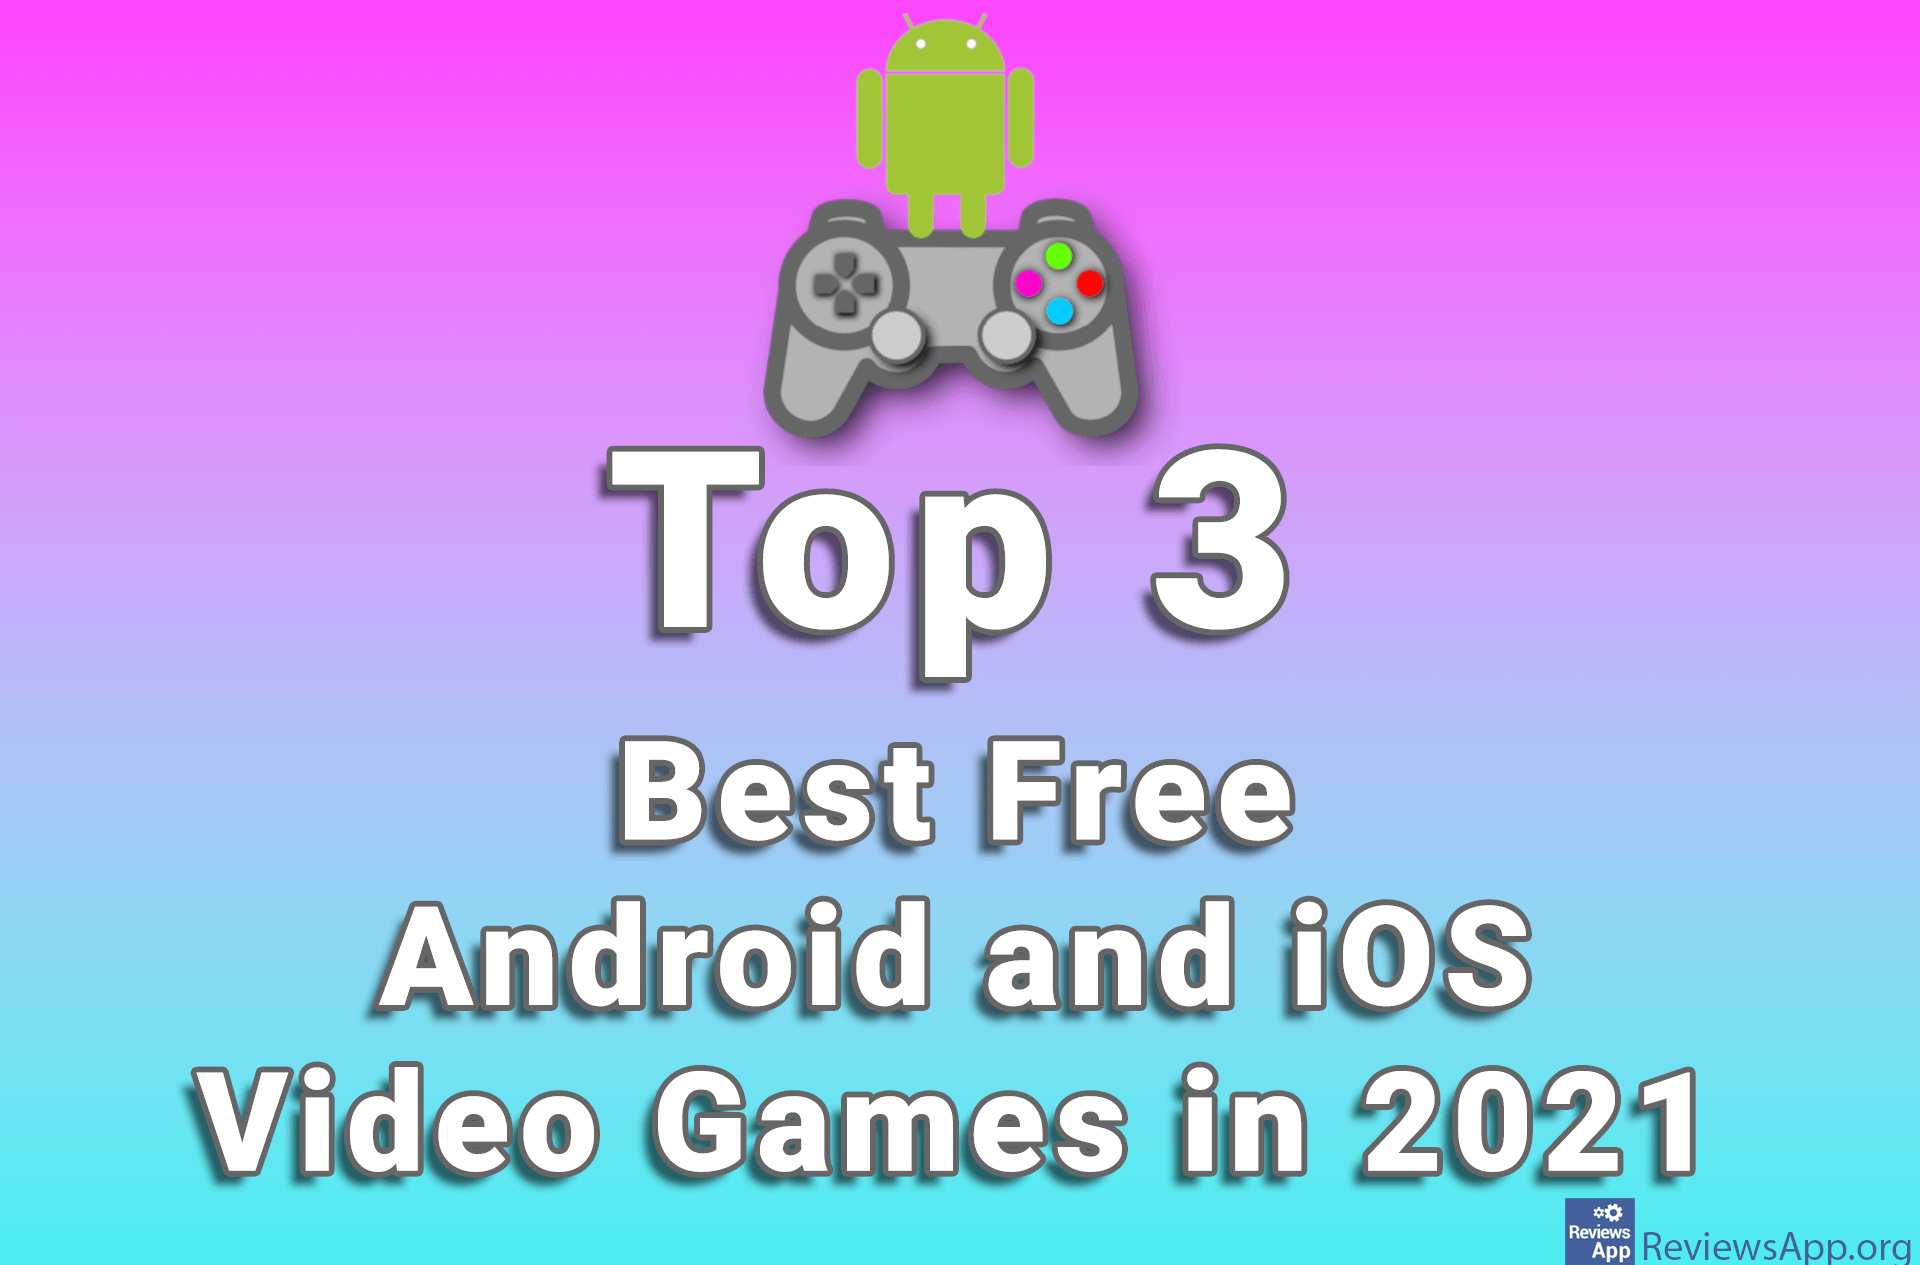 Top 3 Best Free Android and iOS Video Games in 2021